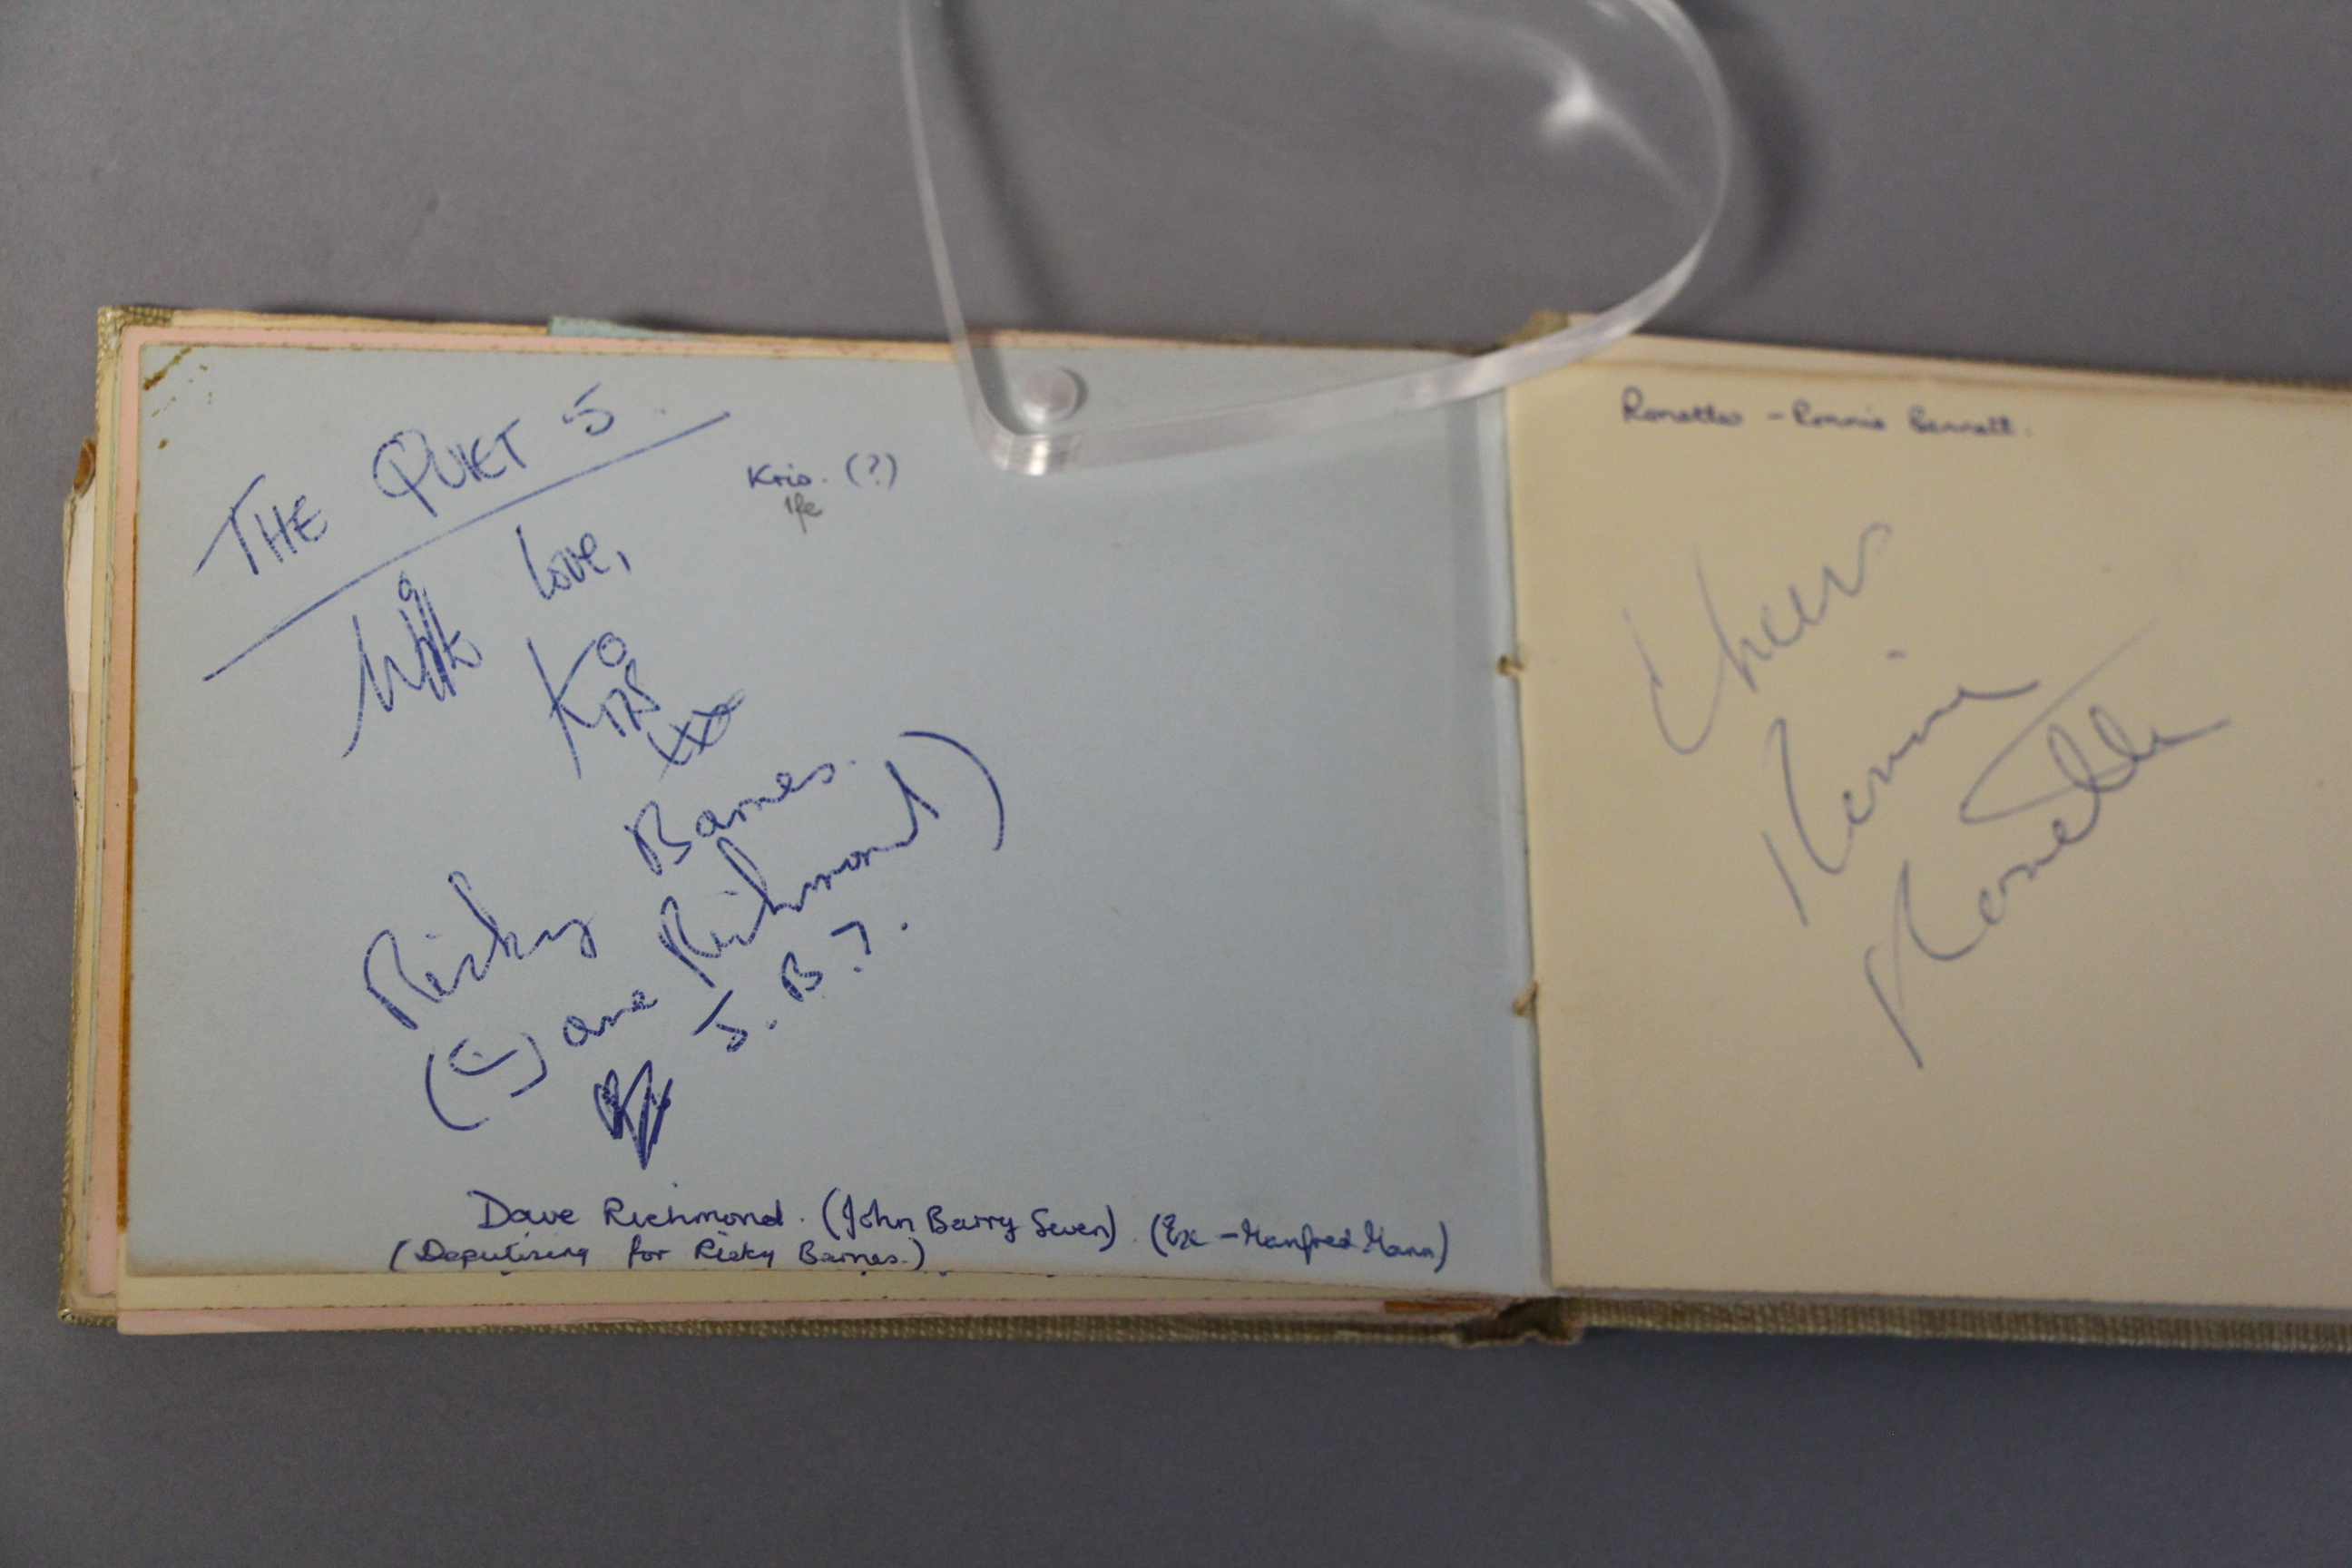 An Autograph book collected by a lady called Jill F whose full name and address appears in the book - Image 14 of 17